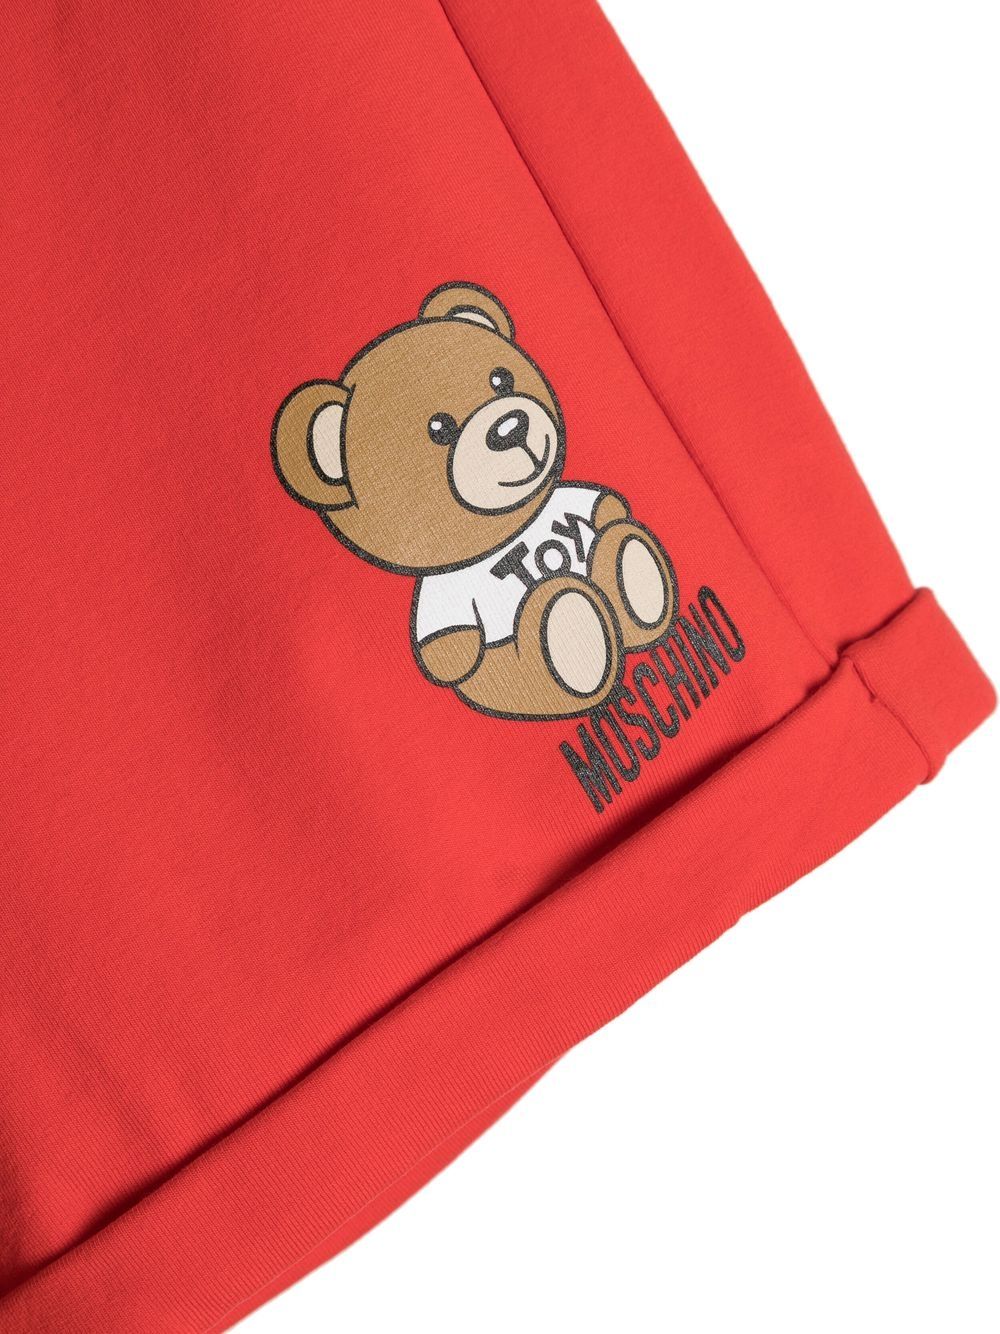 Teddy Toy red shorts